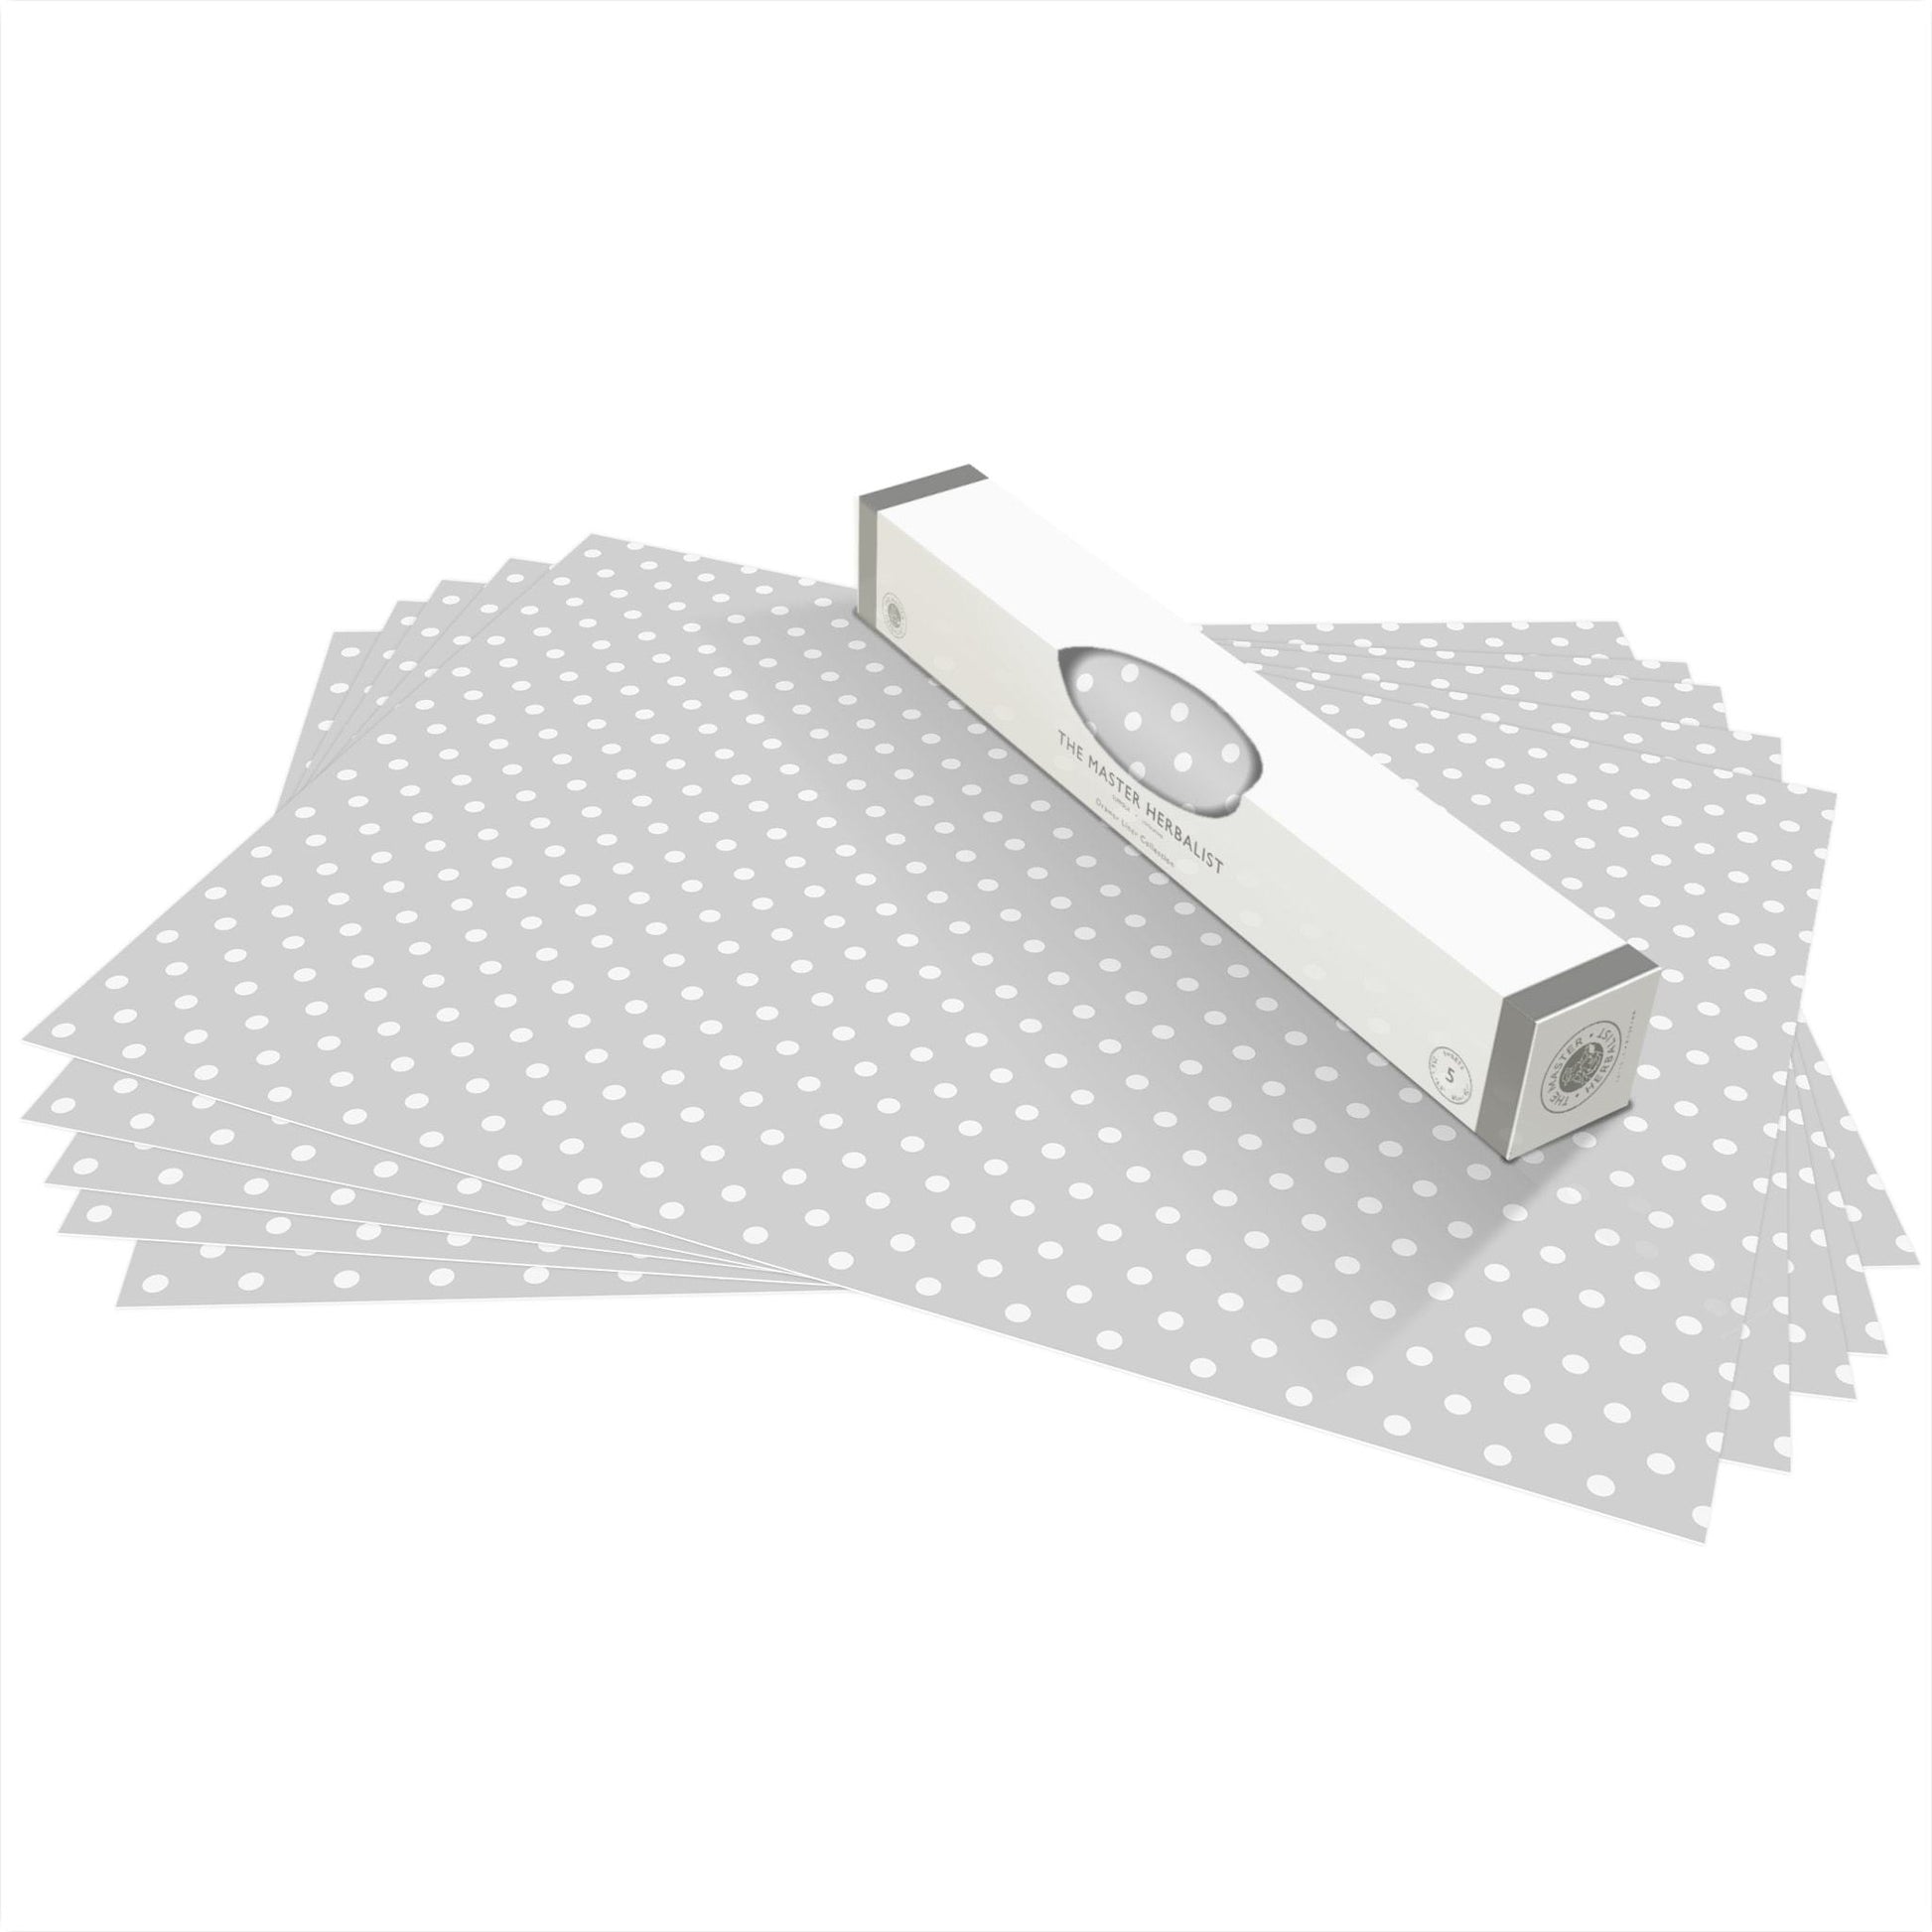 SIMPLY DRAWER LINERS | Wipe Clean & Unscented Drawer Liners in a SOFT GREY POLKA DOT Design. Perfect for Kitchen Drawers, Shelves, Cupboards & Cabinets. Made in Suffolk, England. (Soft Grey)